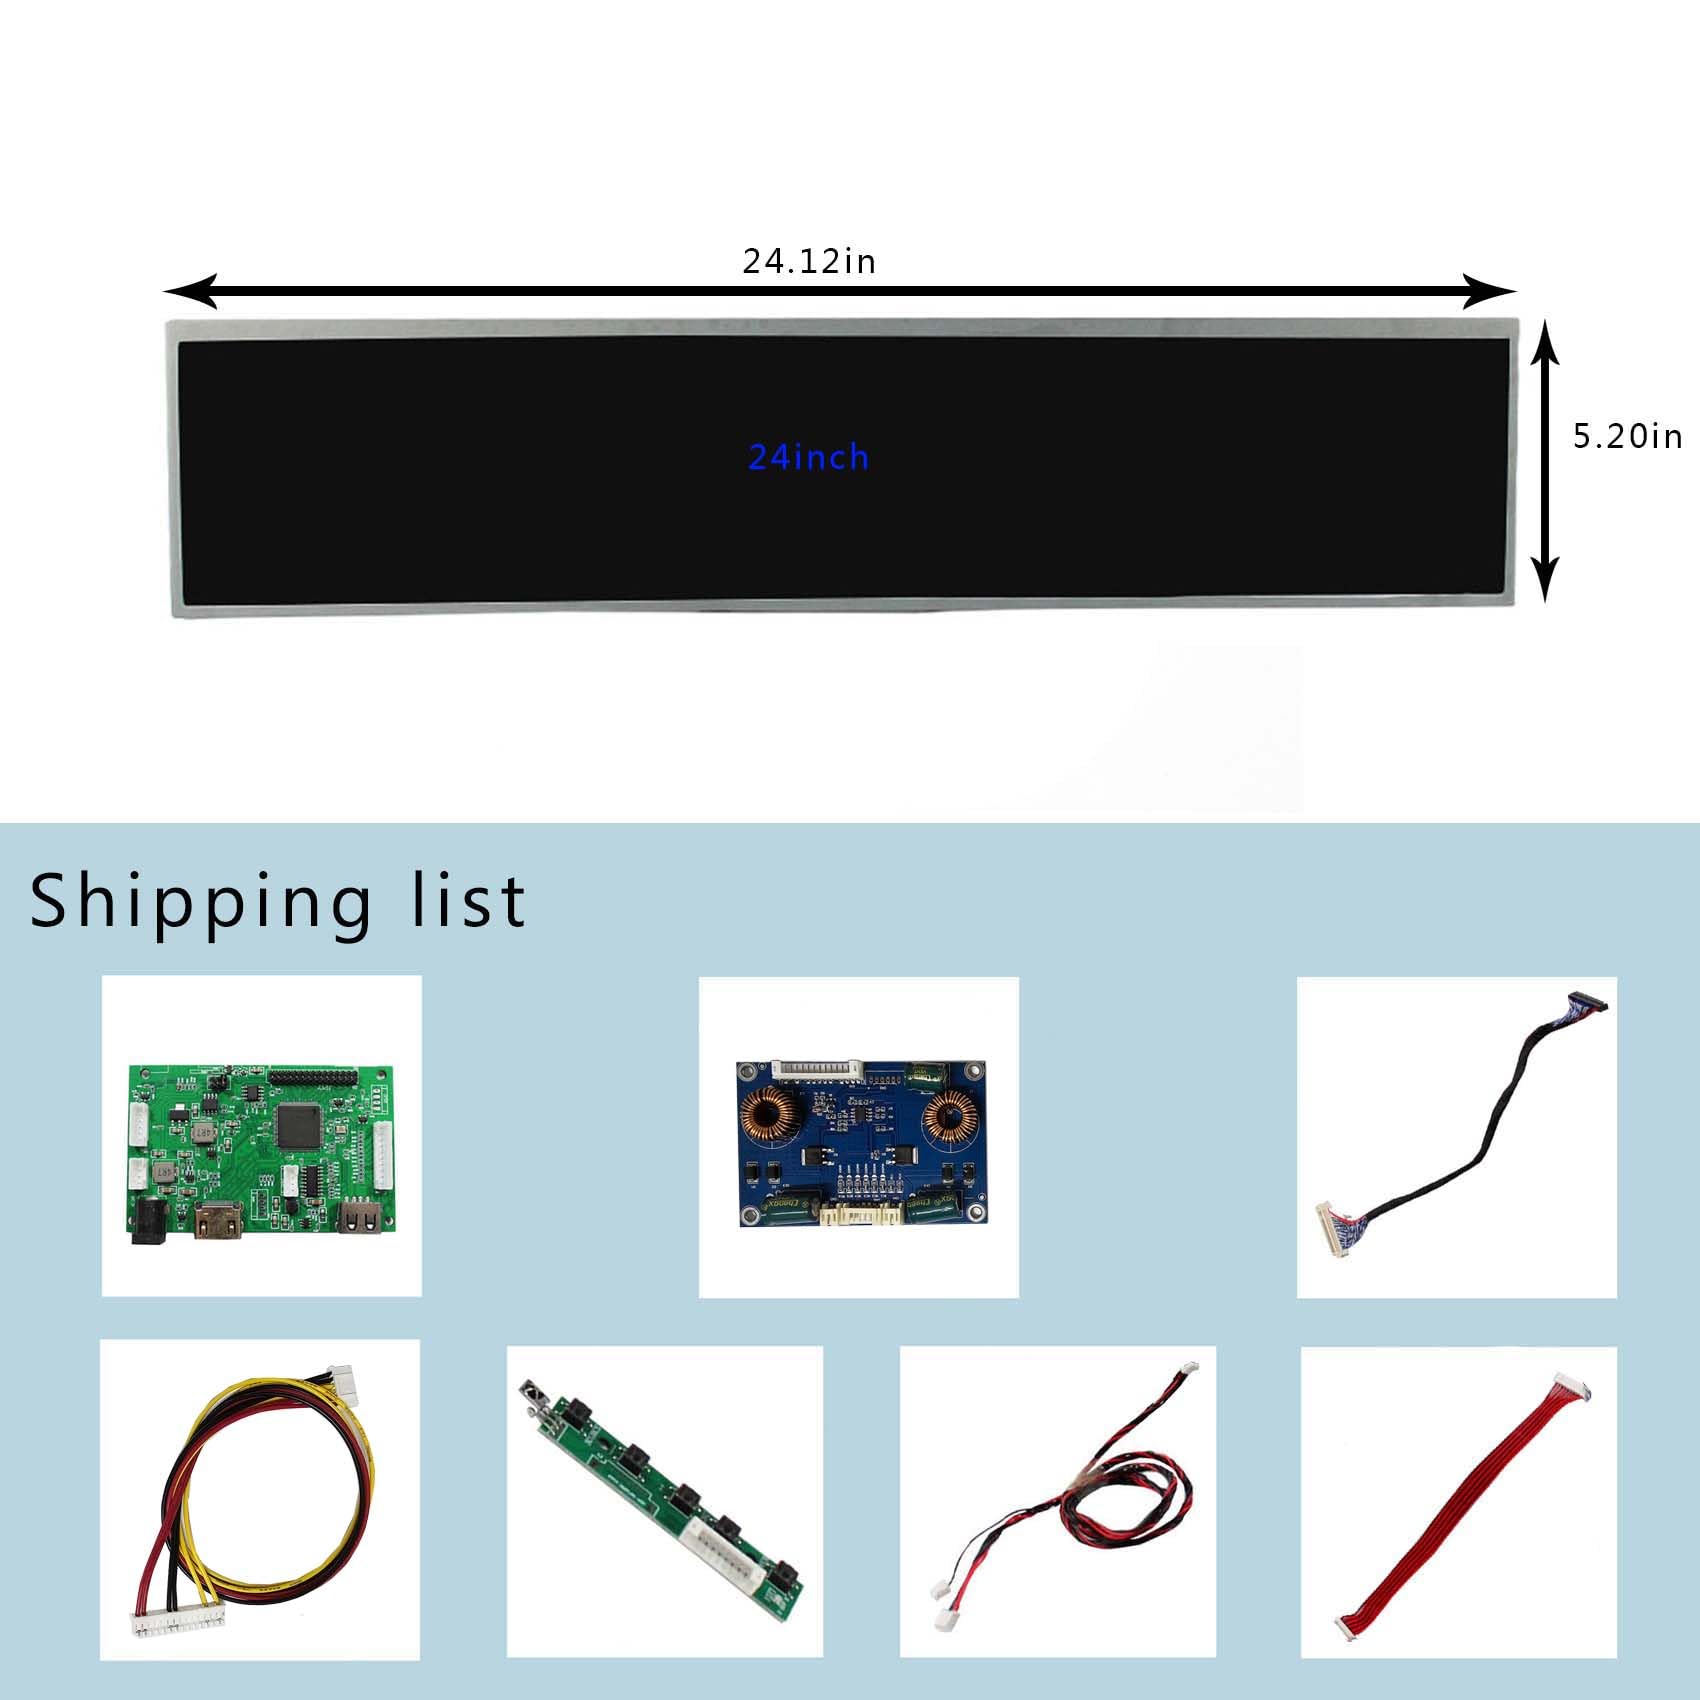 VSDISPLAY 24 Inch 1920x360 Strip Style LCD Screen DV240FBM-NB0 Supports 180 Degree Rotate Image with HD-MI USB LCD Board,as DIY Extended Display Panel/Topper Monitor for Gaming Cabinet